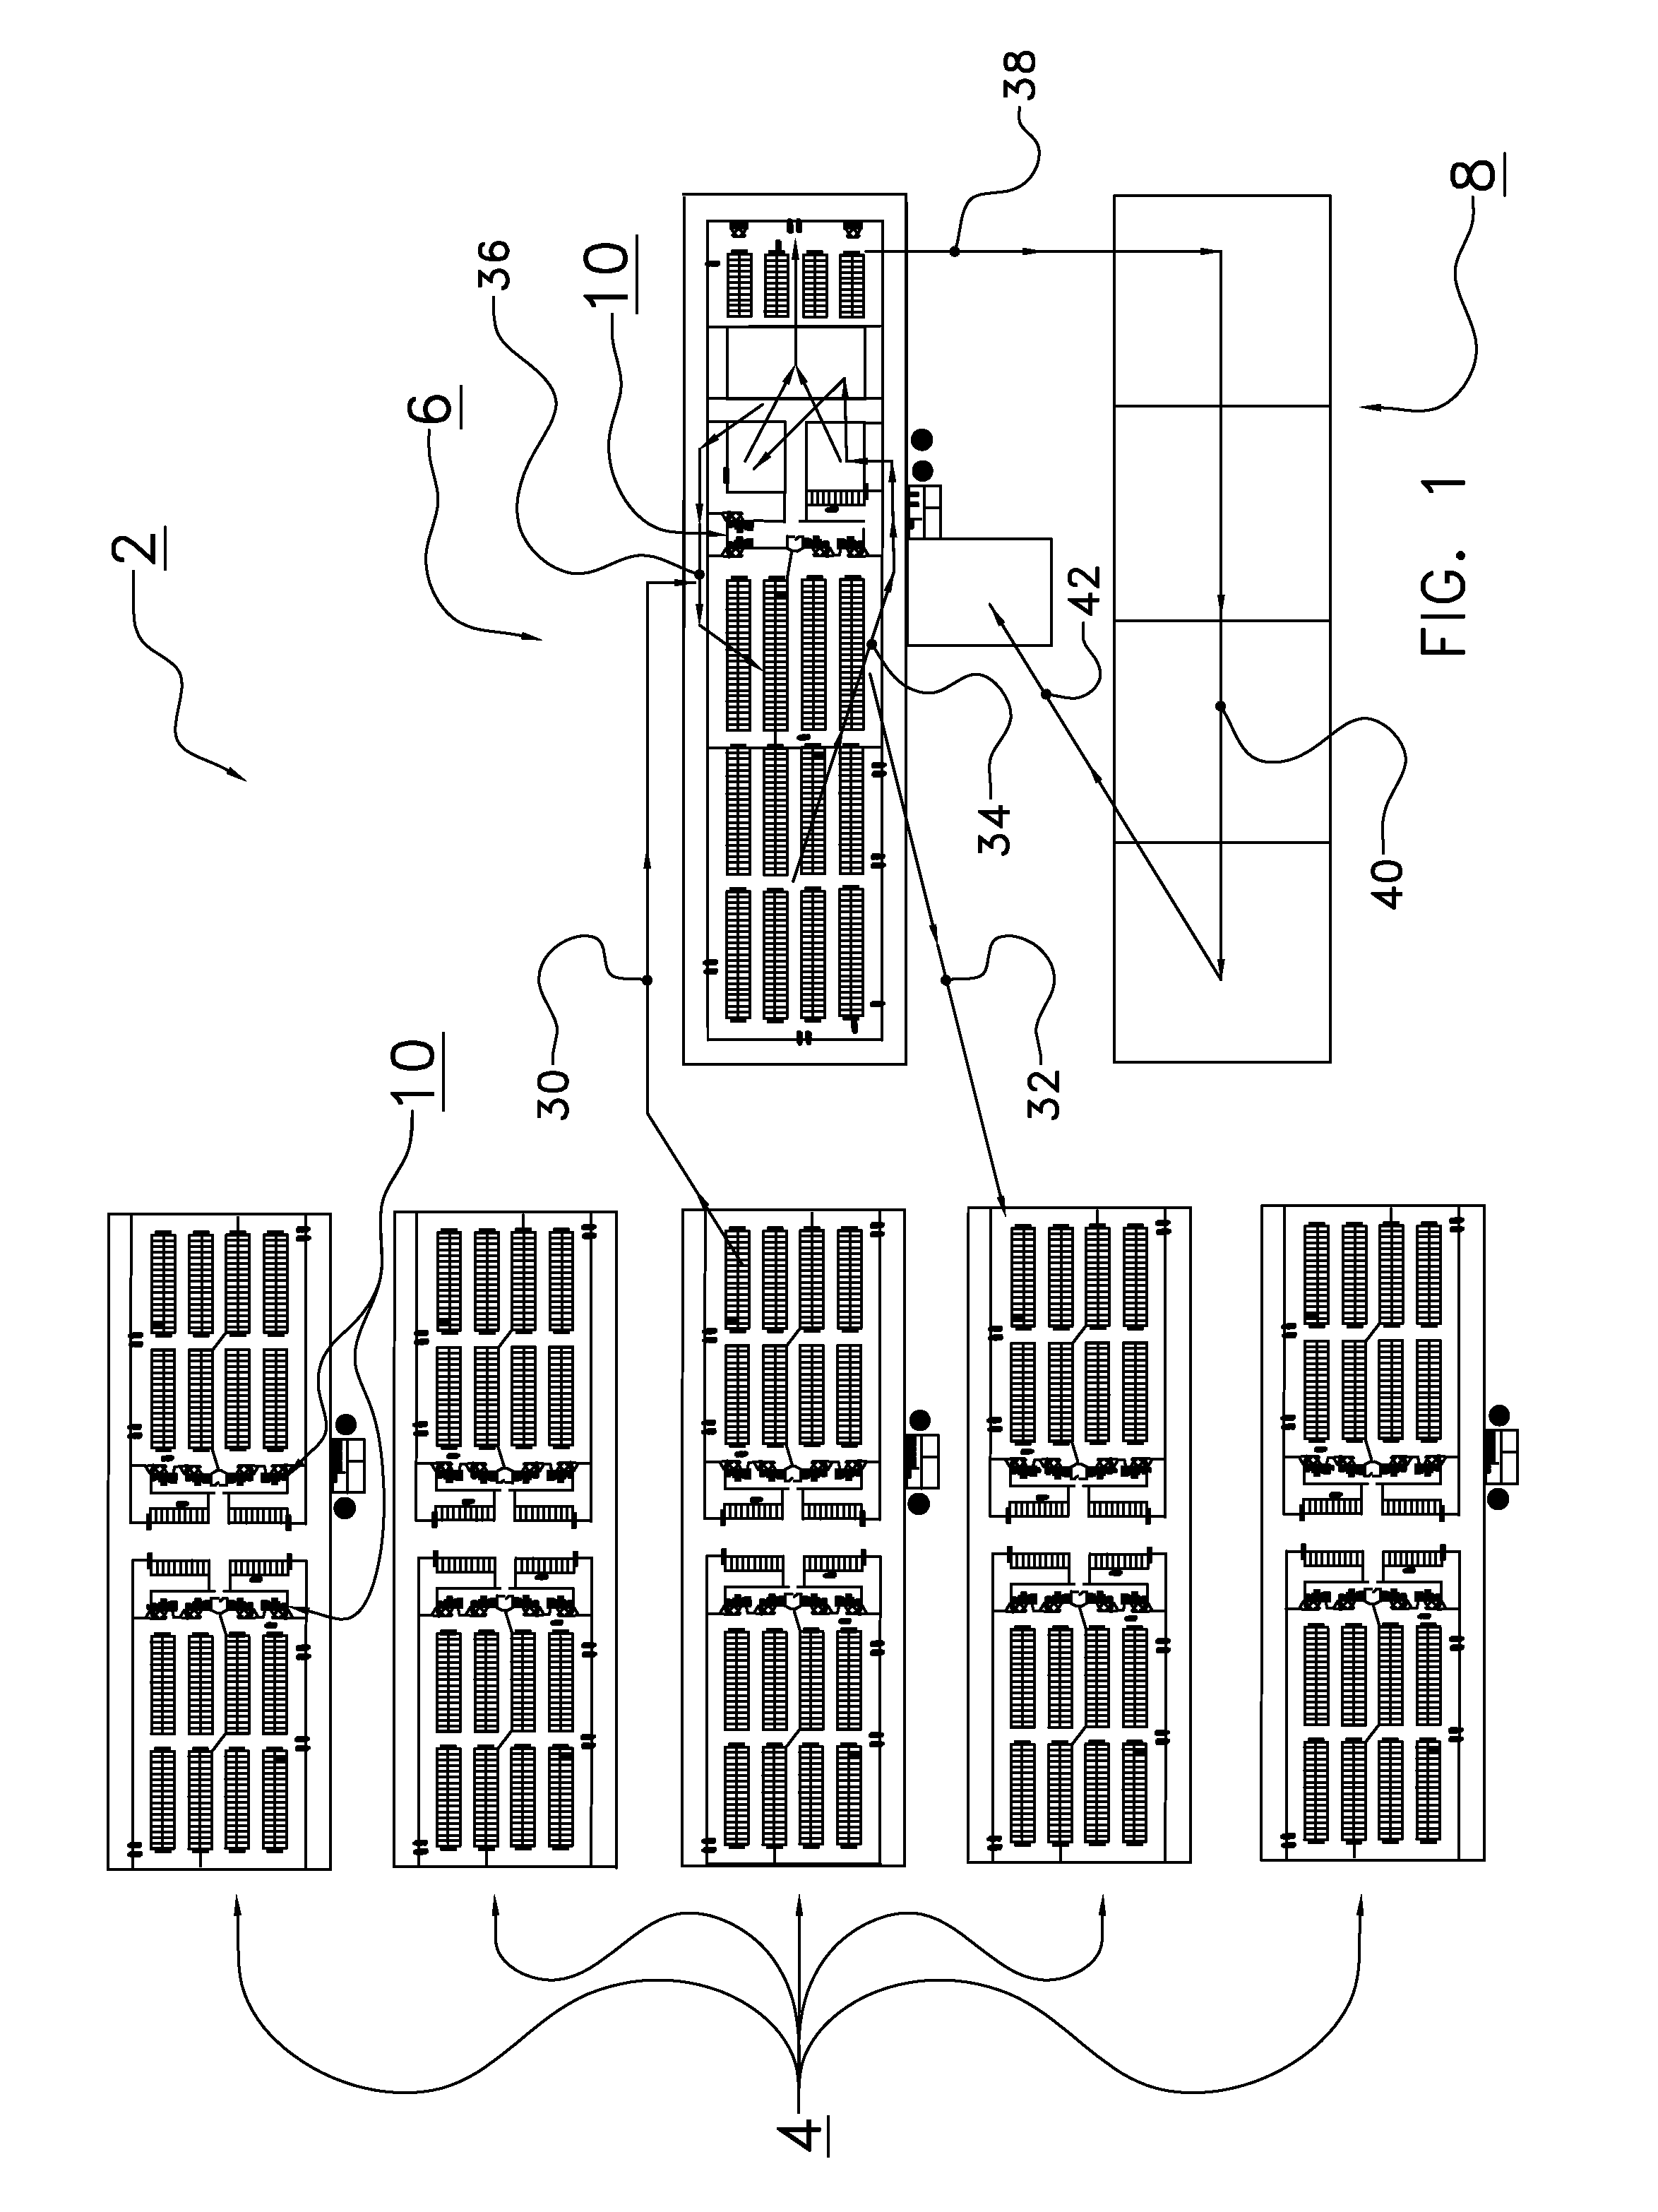 System for managing a group of dairy animals